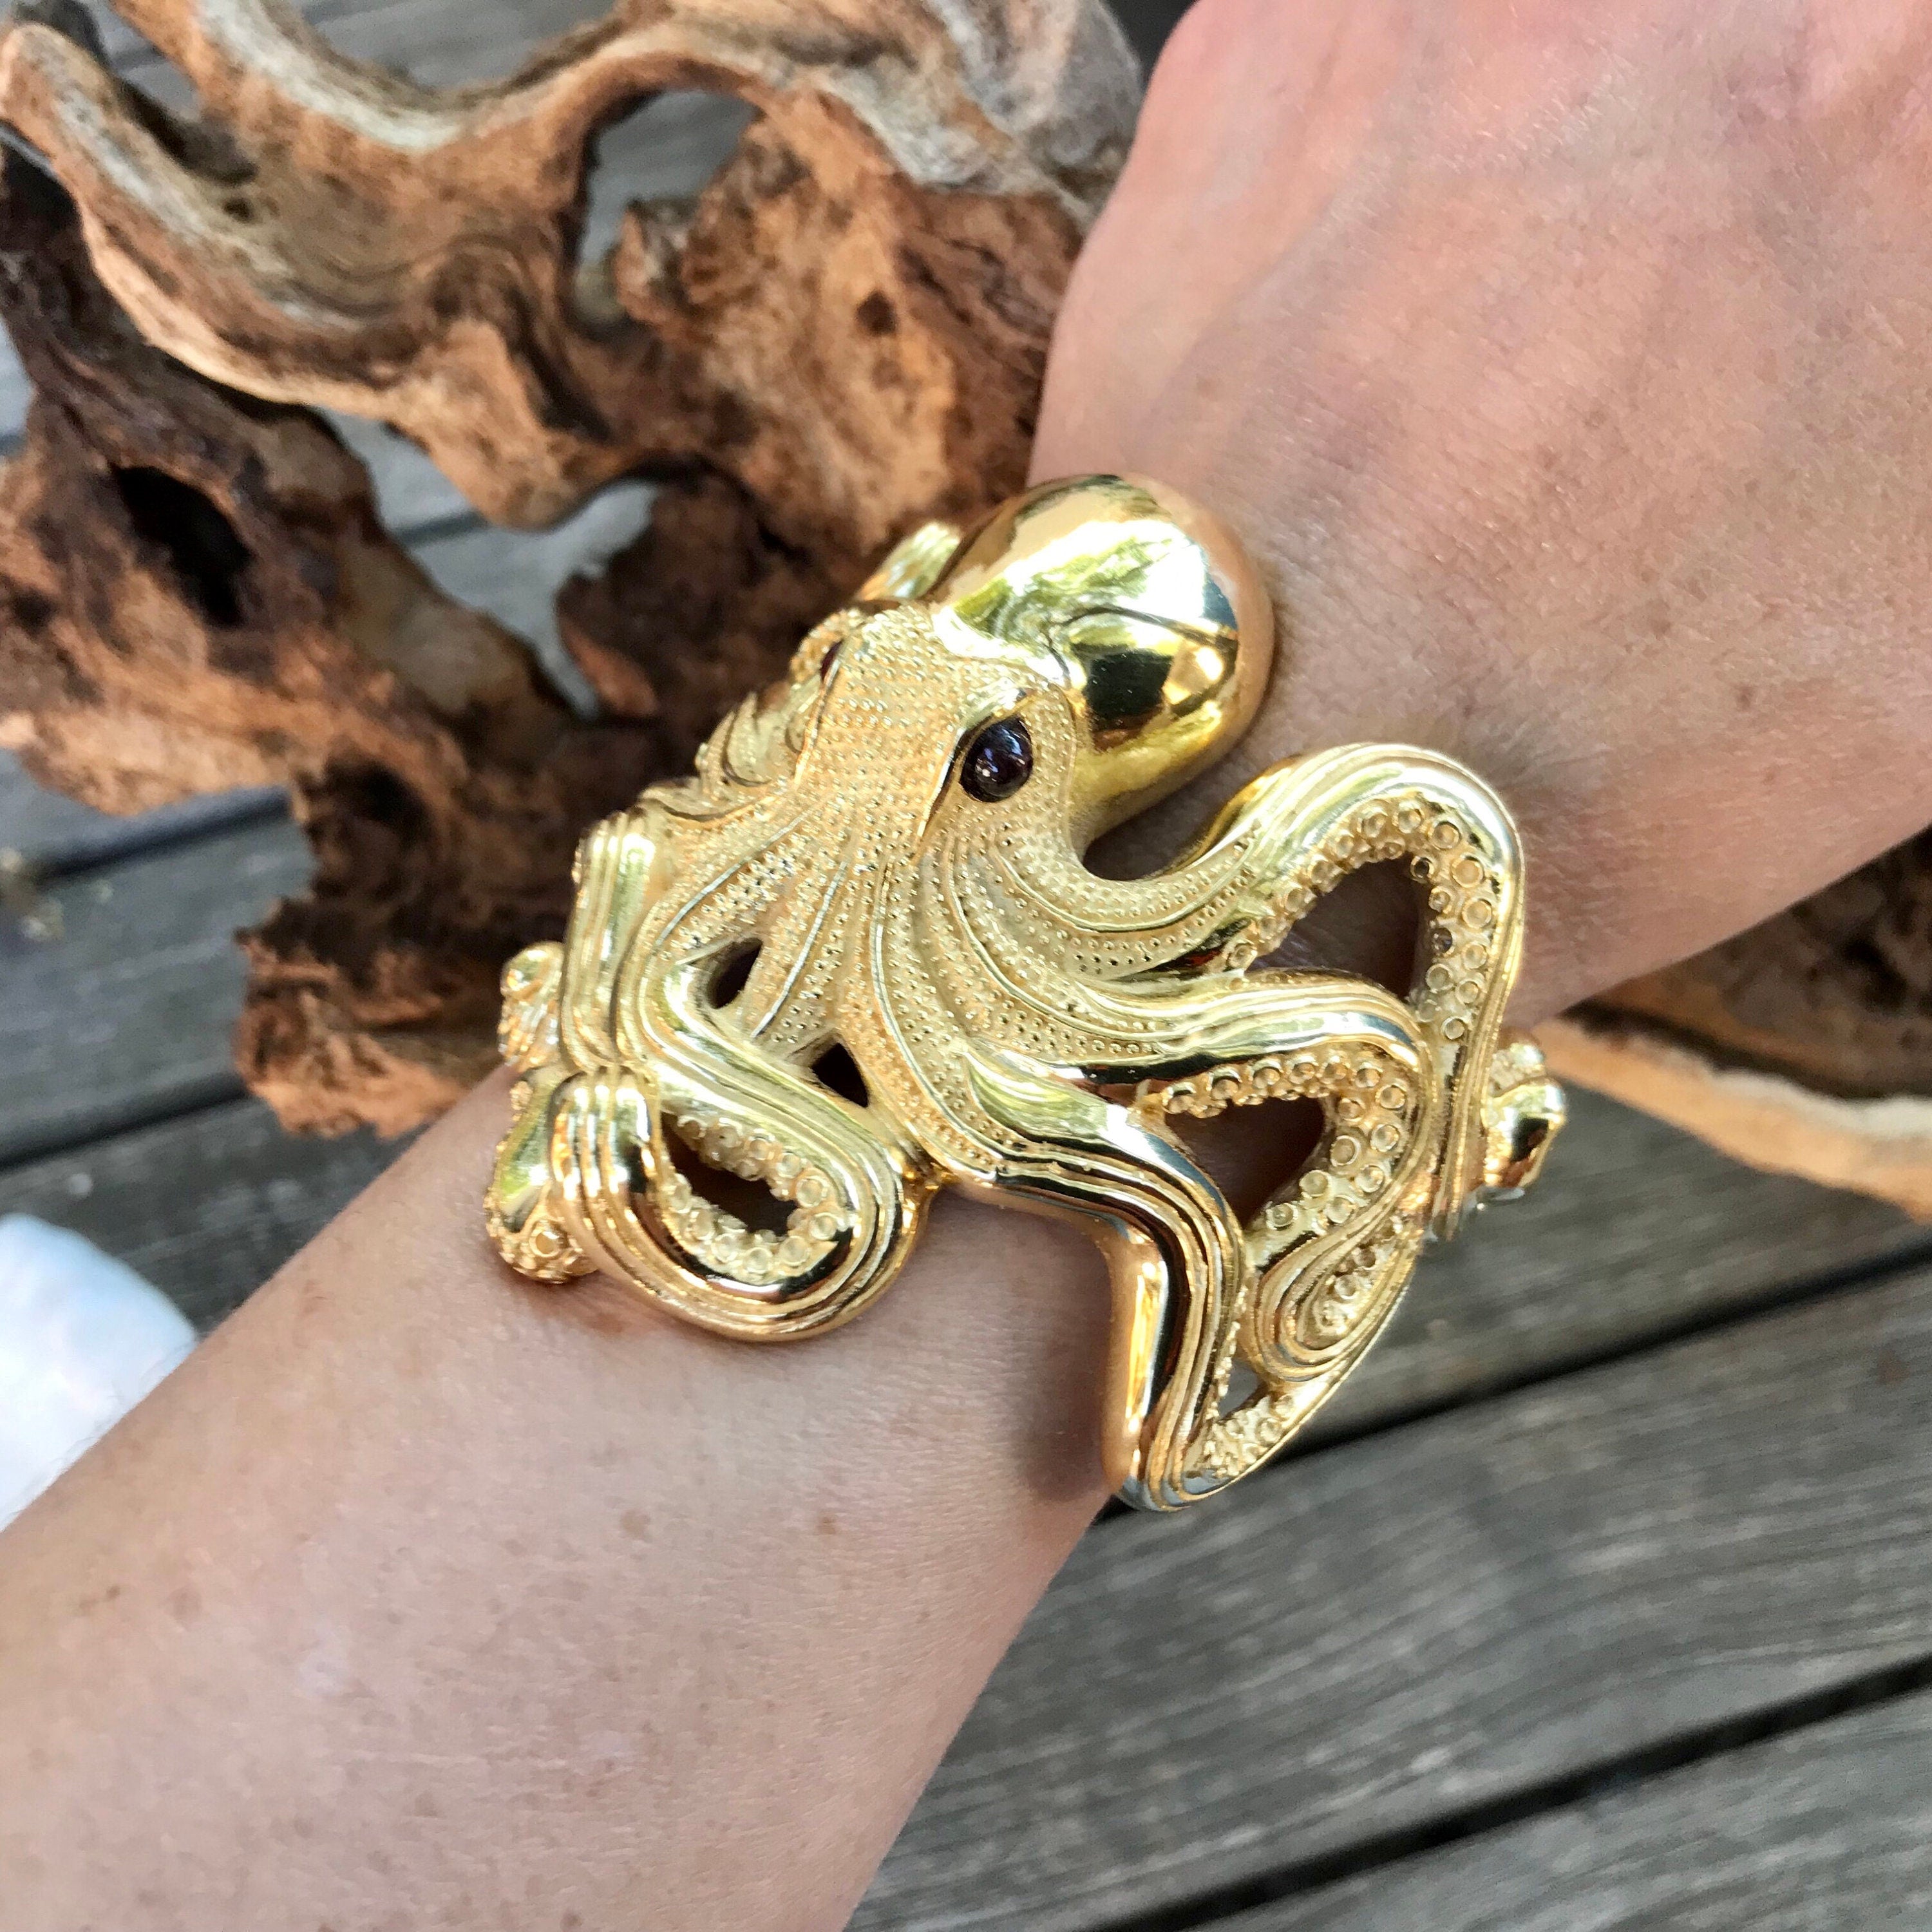 Octopus Ring Cool Statement Kraken Jewelry Rings Tentacle Ring Squid Rings  for Gifts (12) - Walmart.com